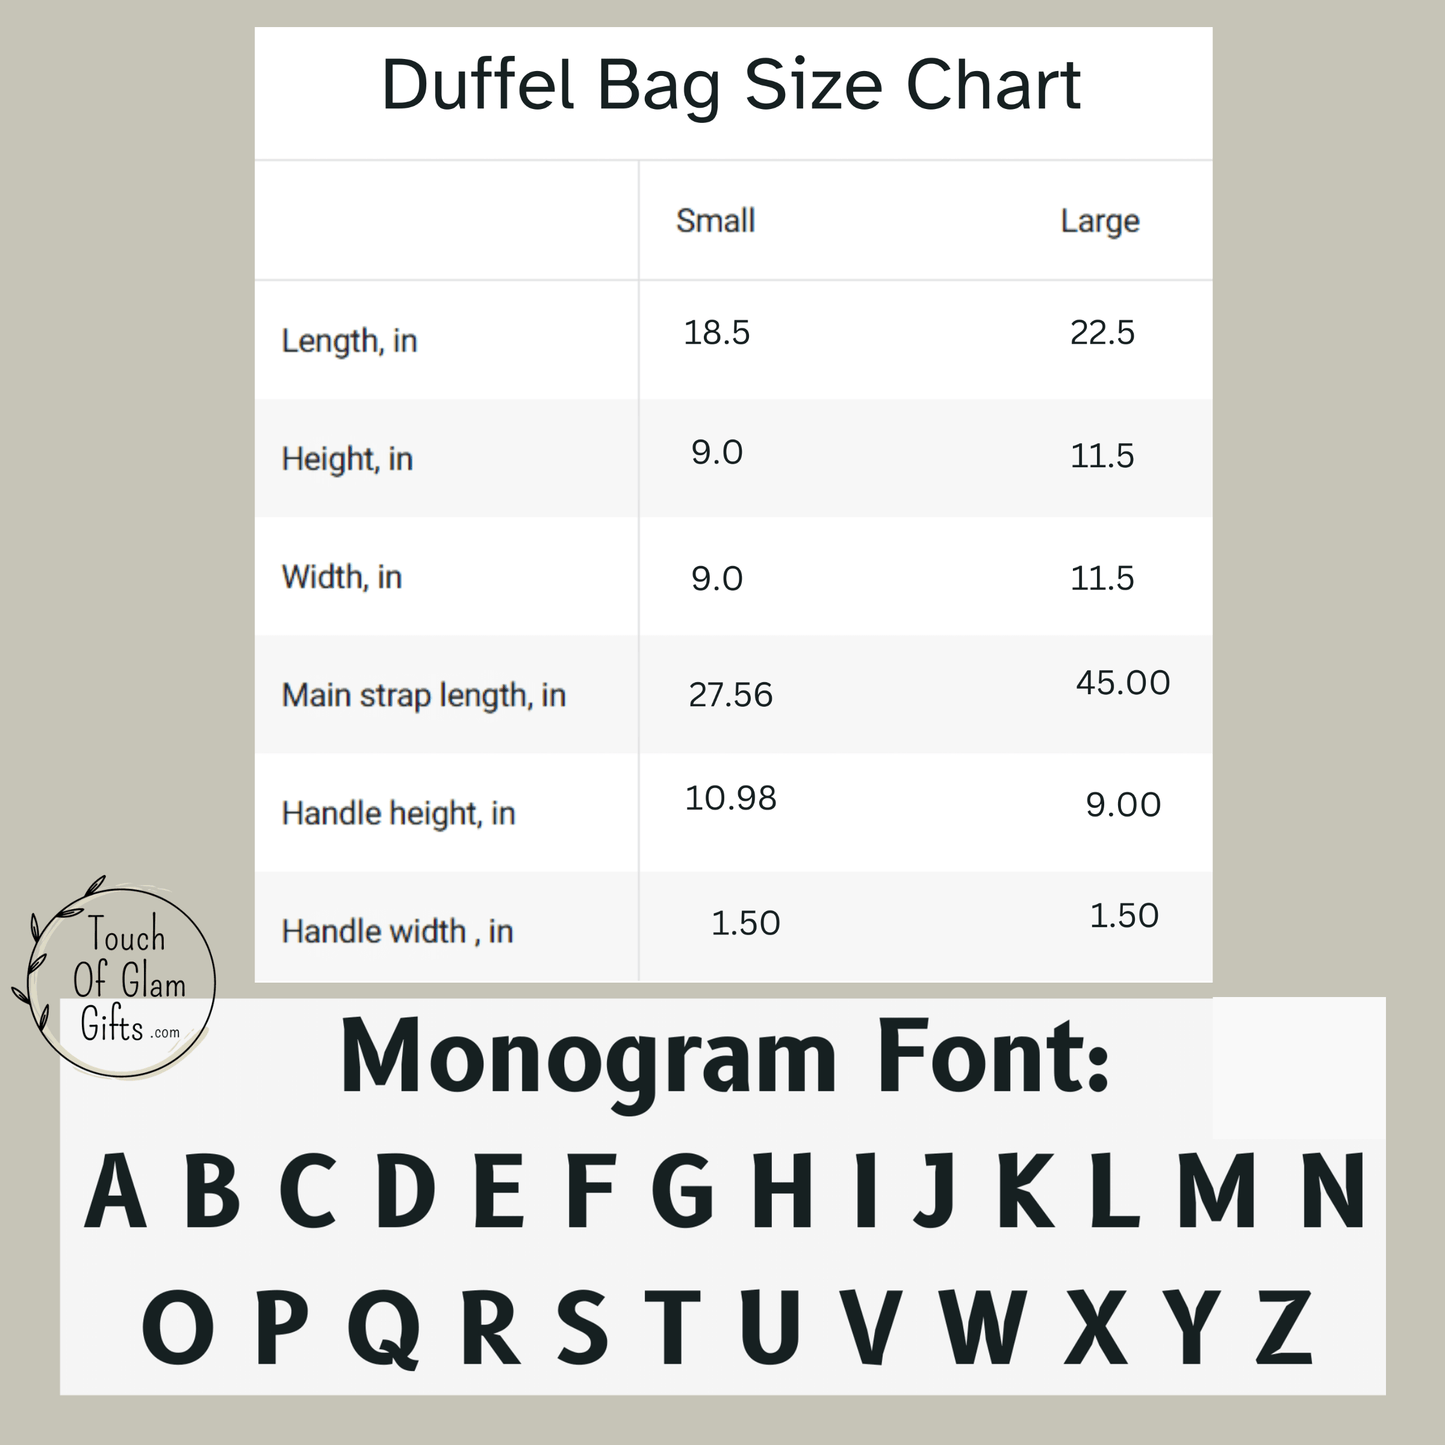 Size chart comparing the large zippered duffel bag to the small size. This also shows the font used for monogram initials alphabet.